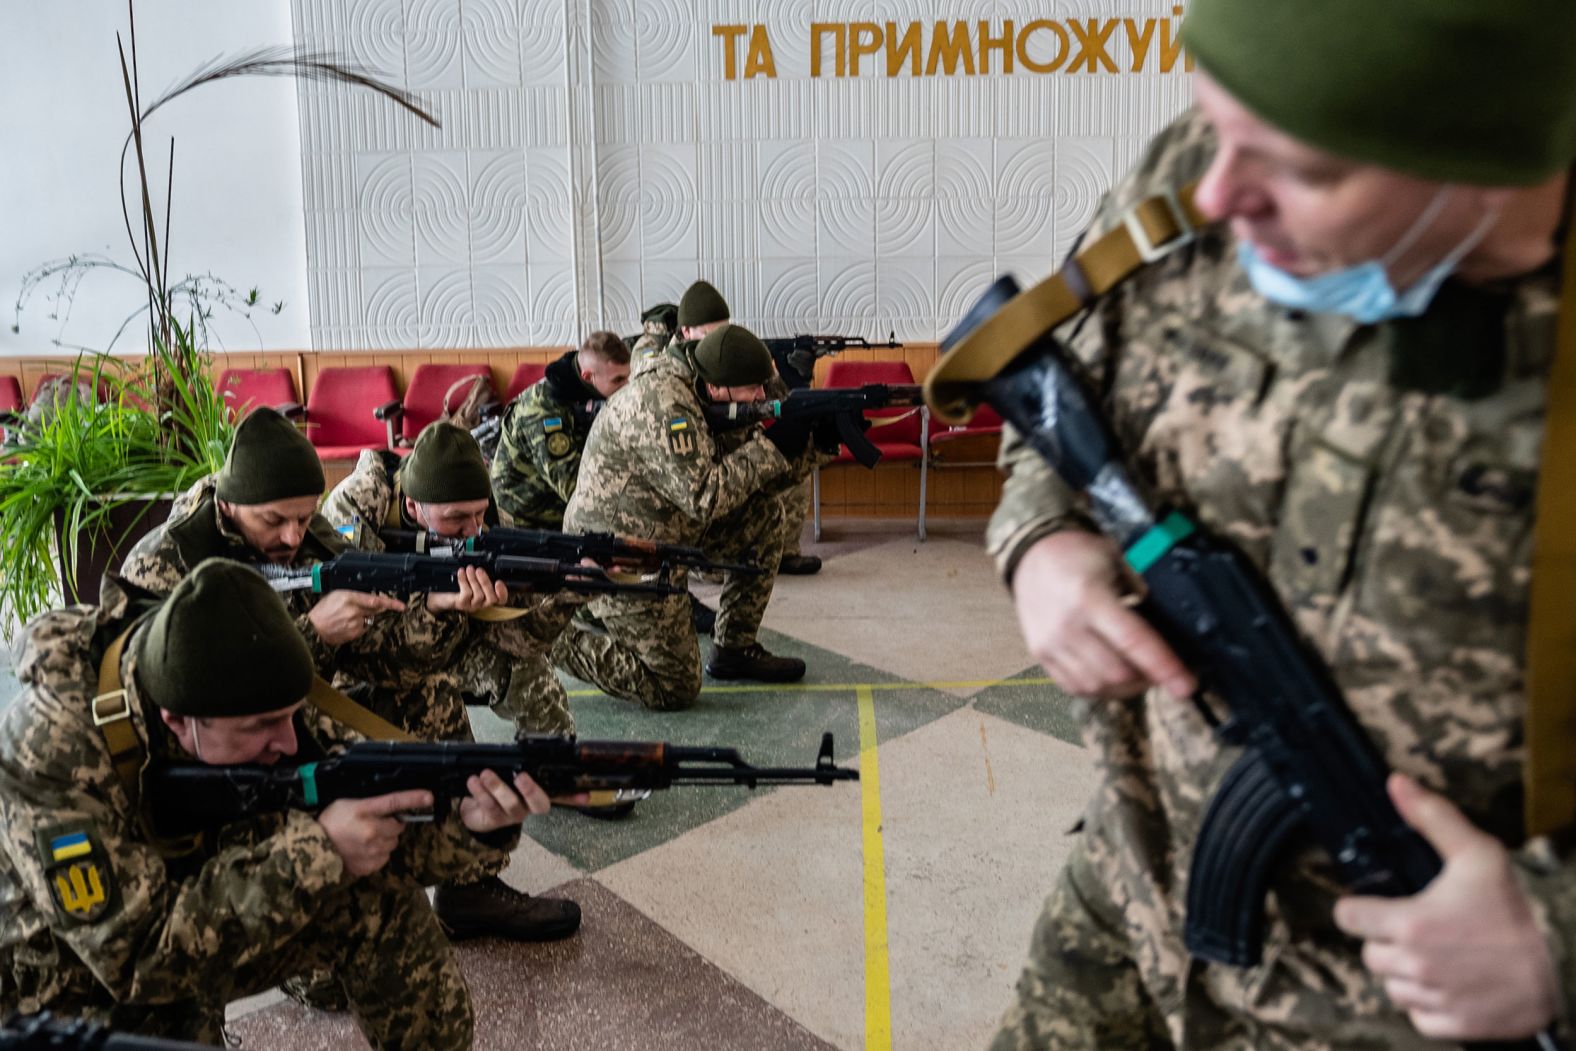 New reservists learn rifle skills on their first day of training in Kharkiv.